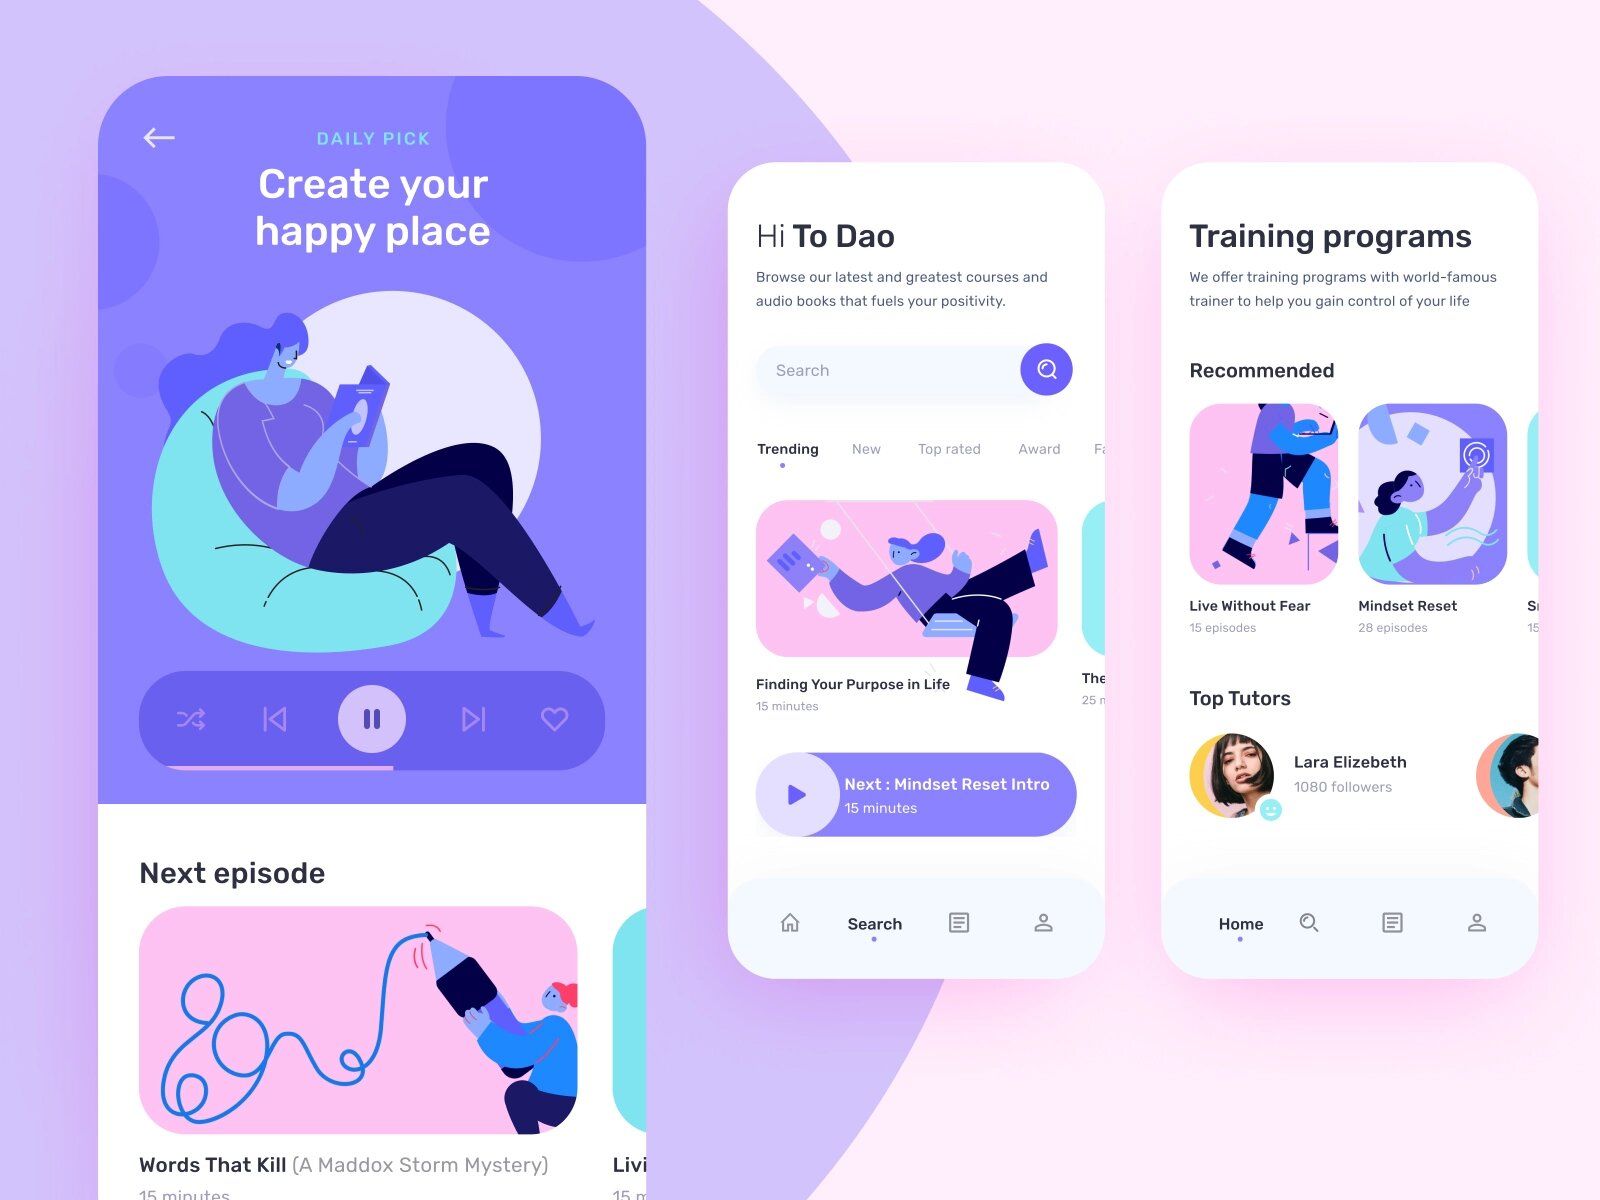 Small business apps allow you to provide high customization and track users’ response to it (*image by [Toda ✿](https://dribbble.com/todao){ rel="nofollow" target="_blank" .default-md}*)